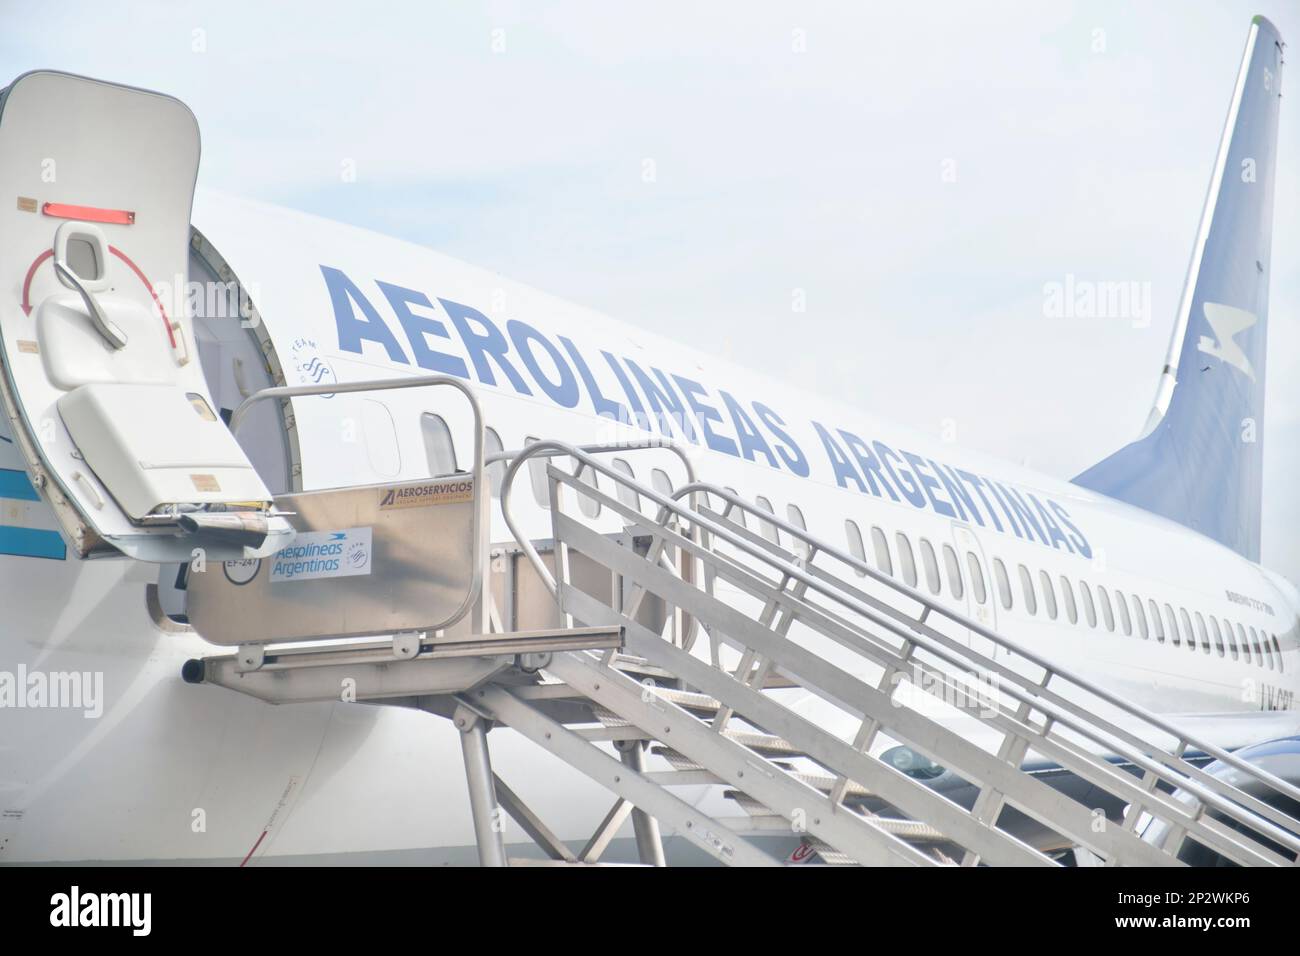 Buenos Aires, Argentina, November 18, 2022: Boeing 737-700 jet of Aerolineas Argentinas airline at the boarding area of the Jorge Newbery Internationa Stock Photo